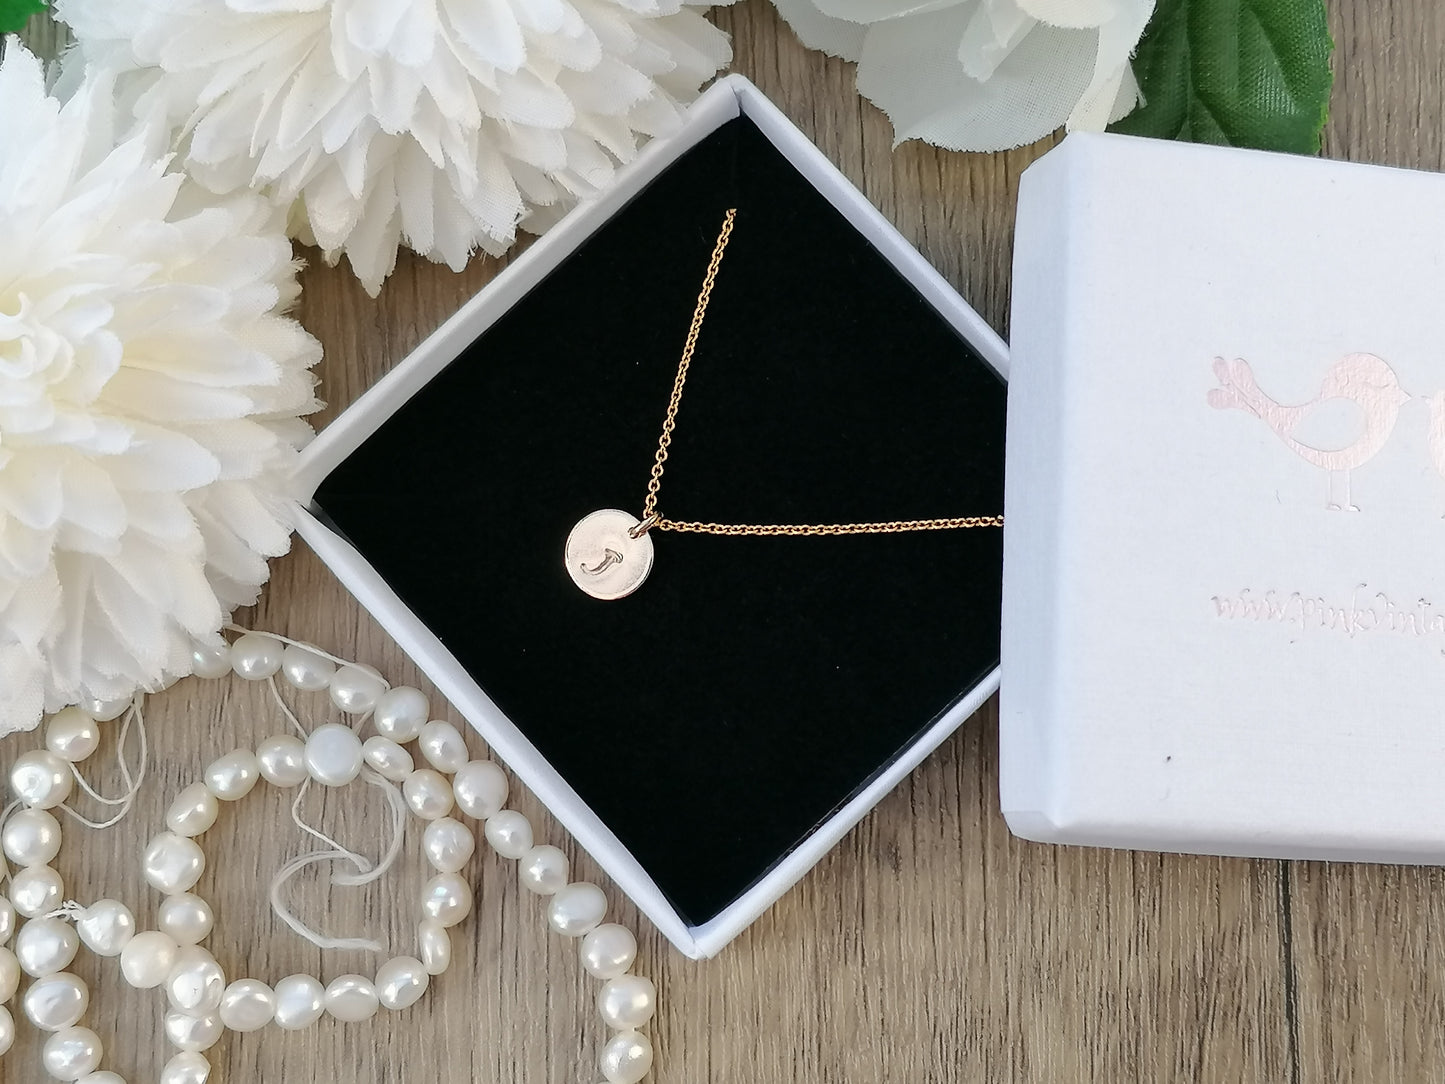 Initial necklace in gold. Choose up to 4 tags.